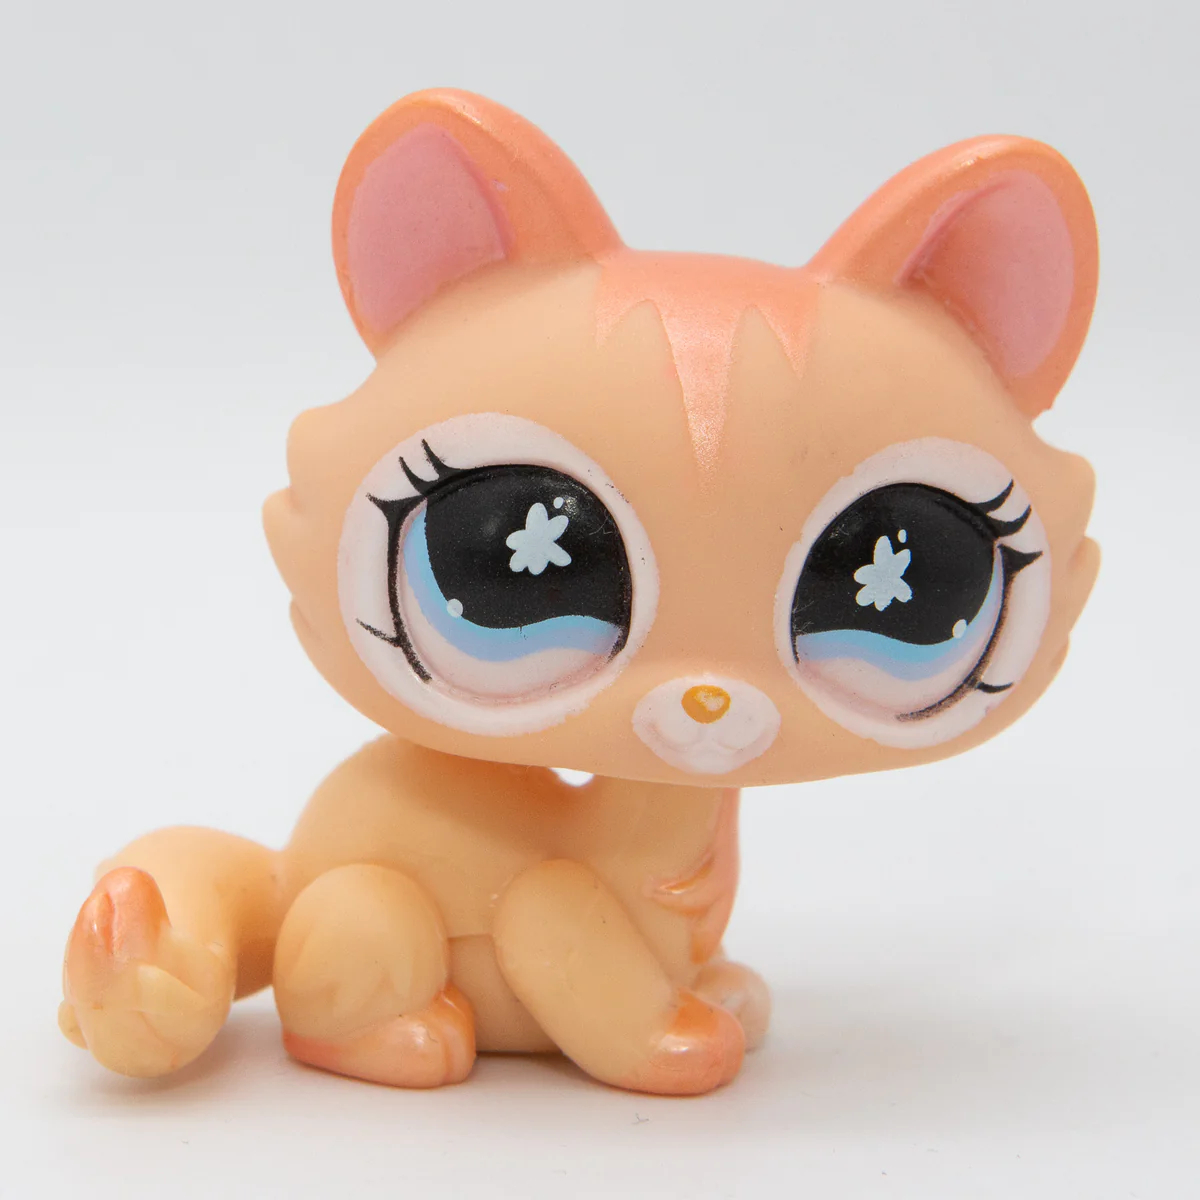 https://static.wikia.nocookie.net/the-littlest-pet-shop-wikia/images/8/8f/LPS_870.jpg/revision/latest?cb=20230623002918